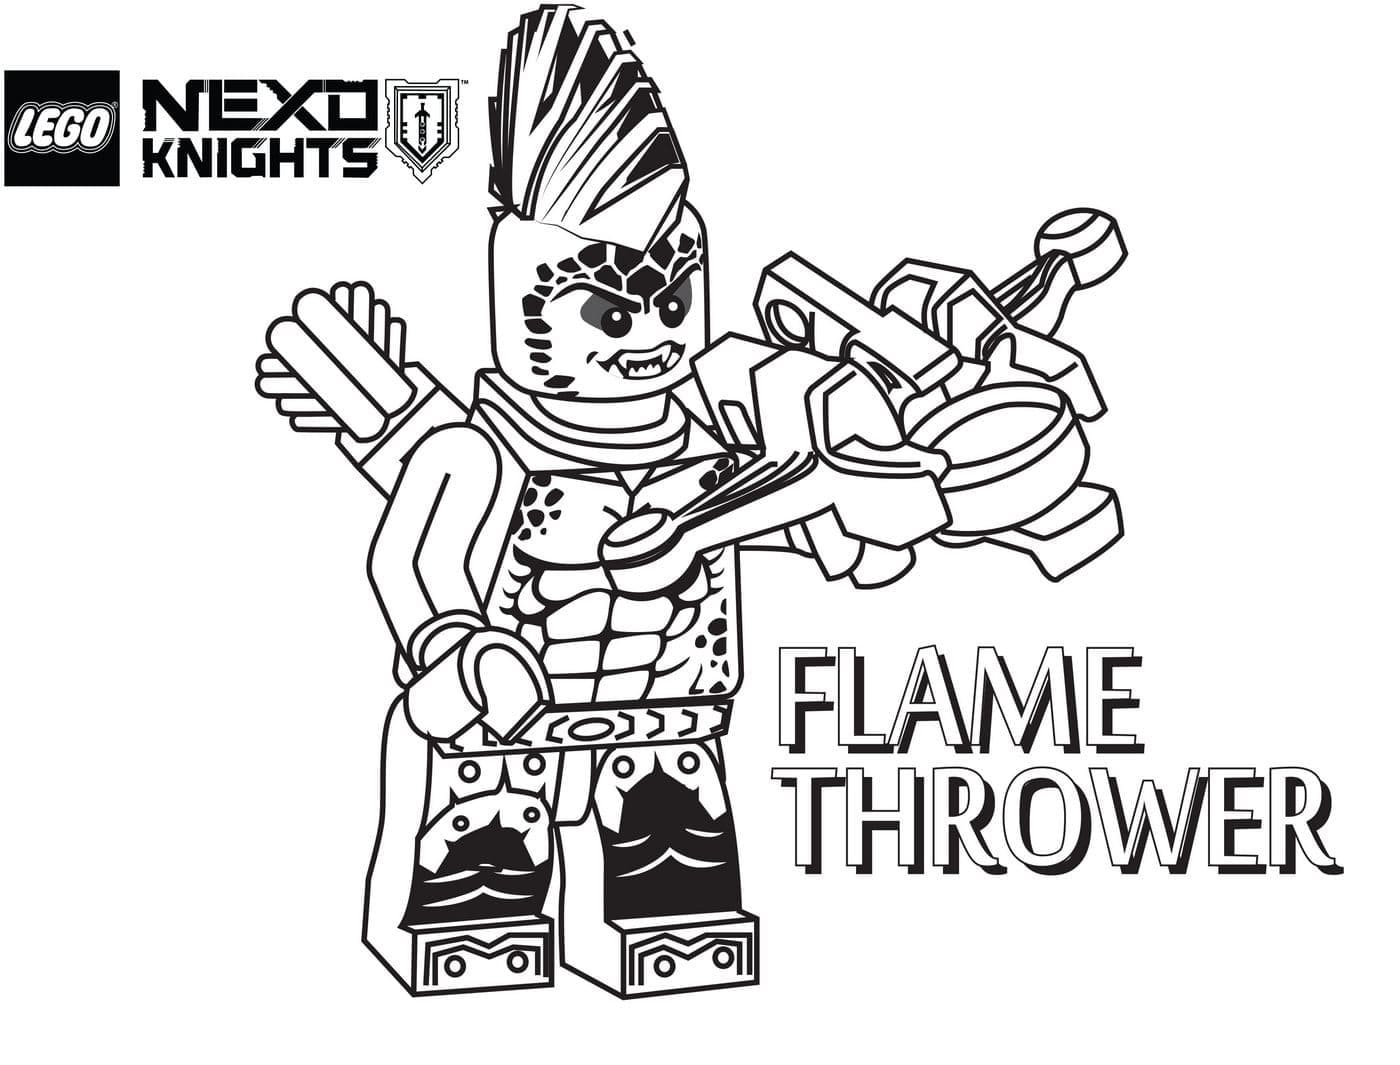 Lego Nexo Knights Flame Thrower coloring page